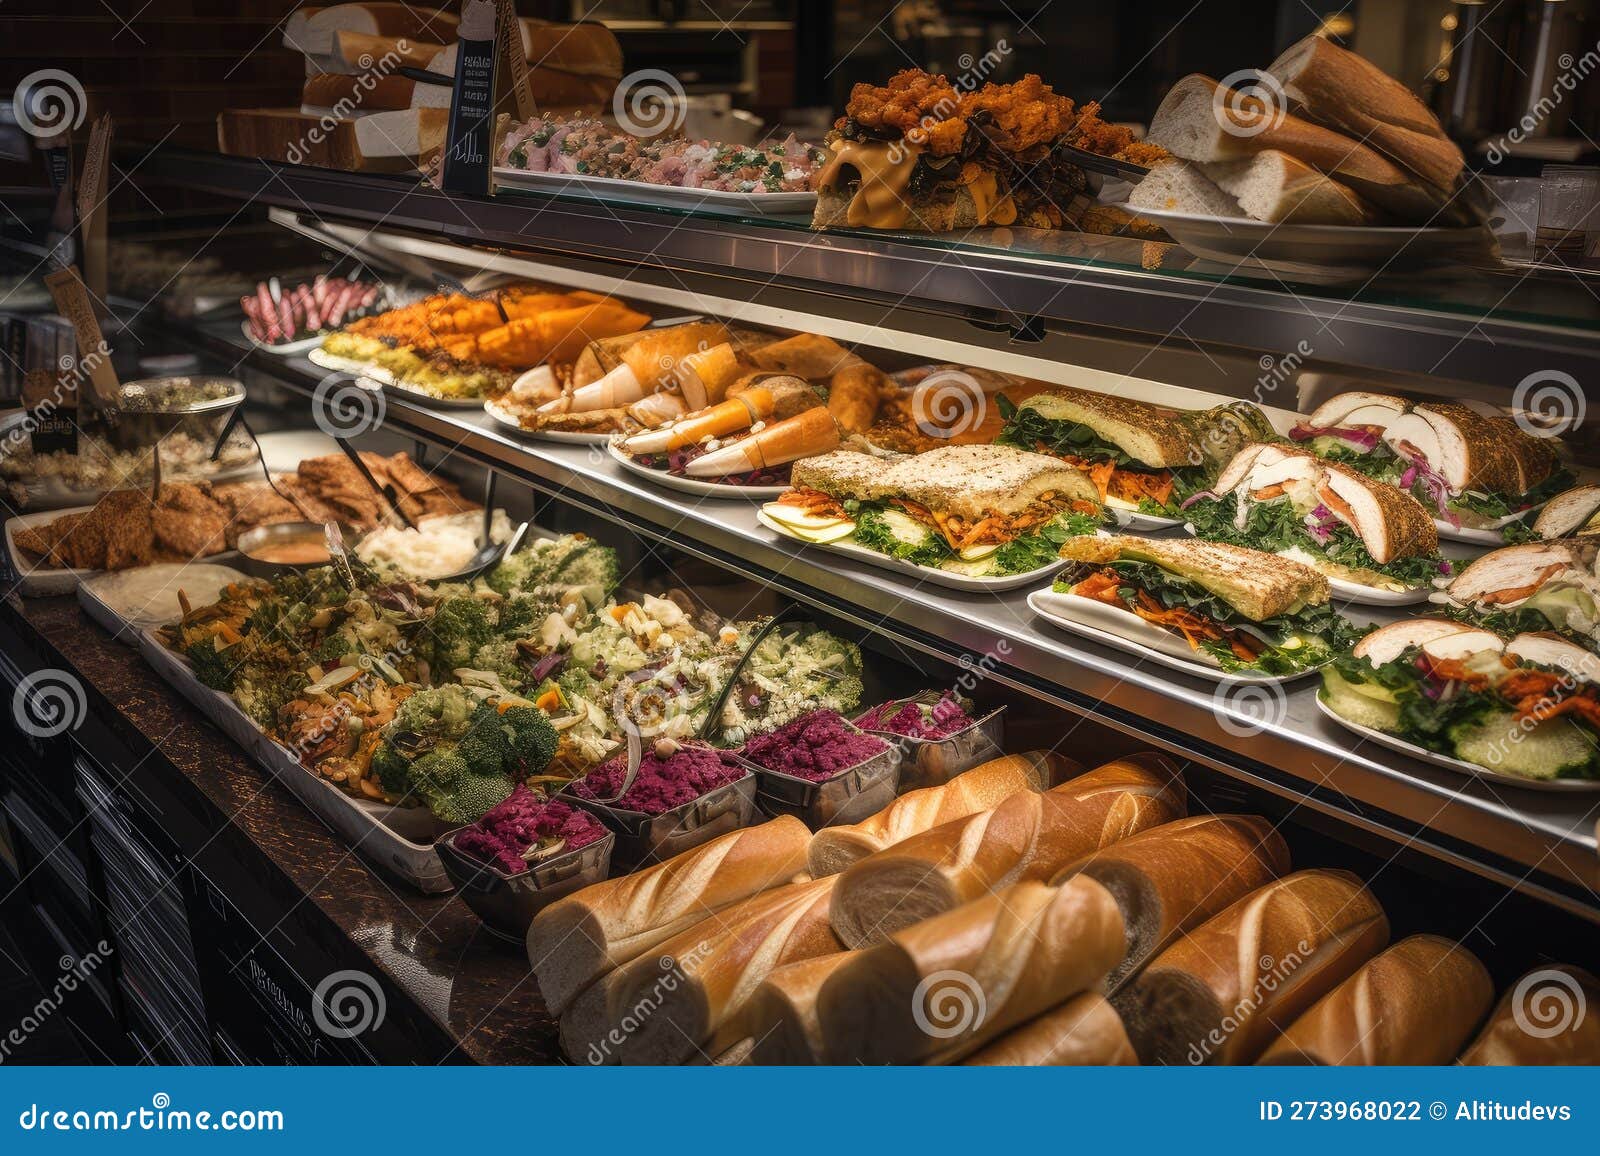 https://thumbs.dreamstime.com/z/deli-counter-variety-sandwiches-wraps-salads-created-generative-ai-273968022.jpg